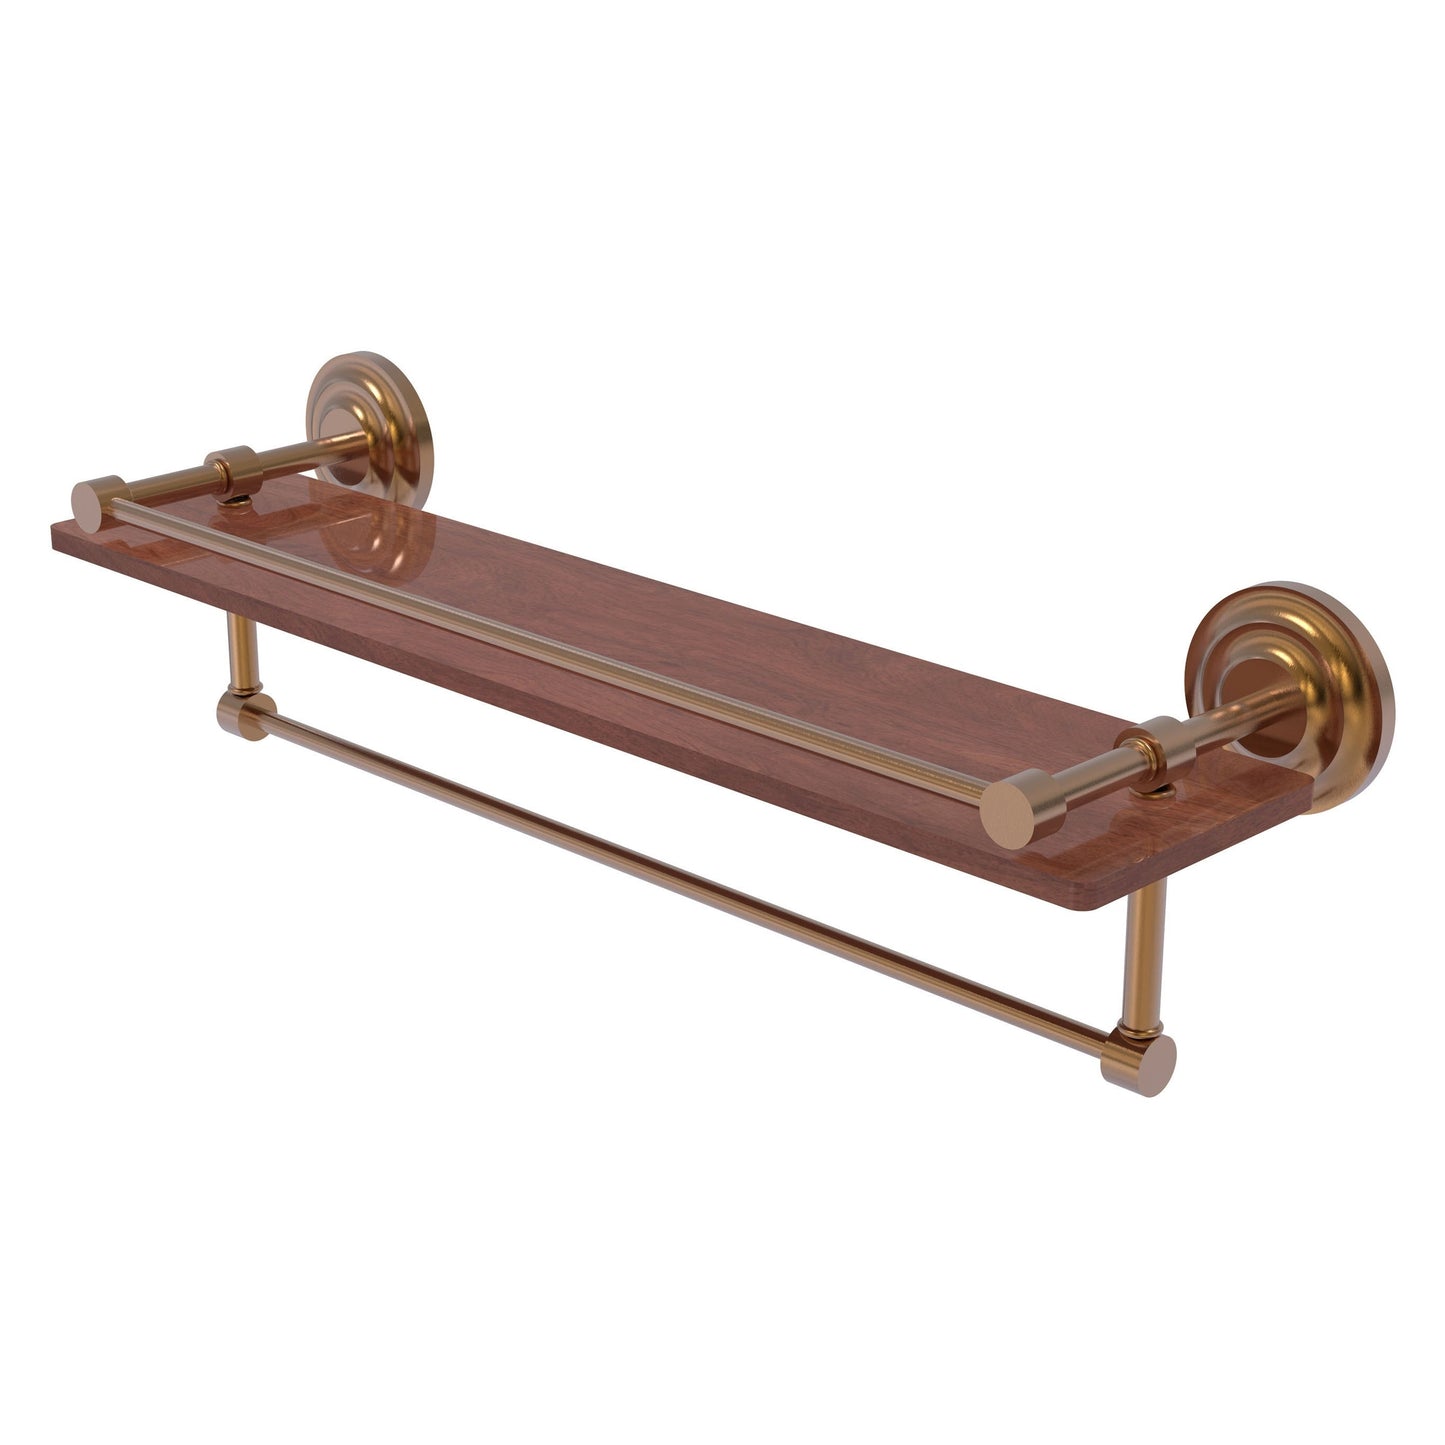 Allied Brass Que New 22" x 5" Brushed Bronze Solid Brass 22-Inch IPE Ironwood Shelf With Gallery Rail and Towel Bar